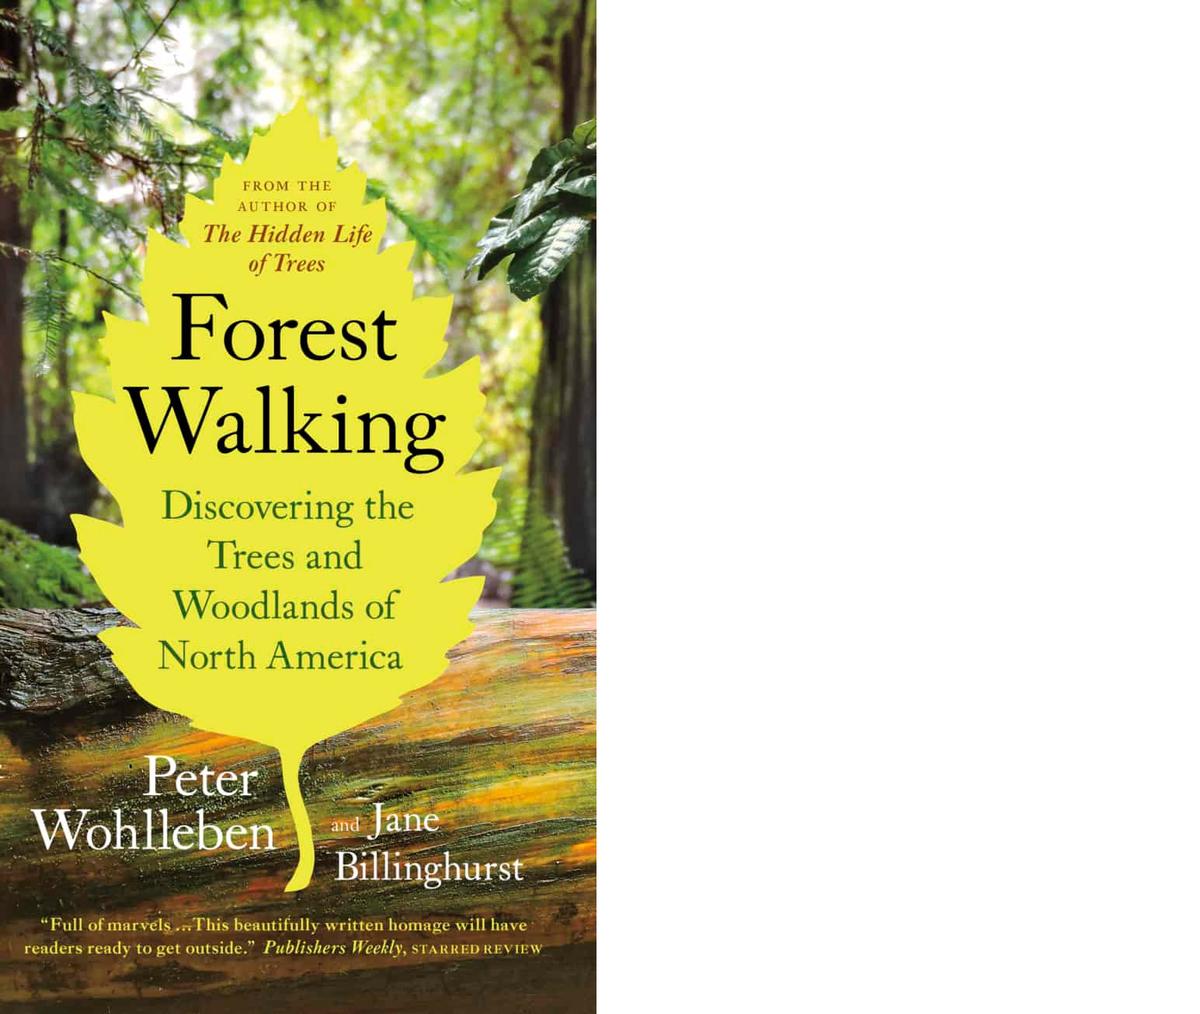 Cover of the 2022 guide "Forest Walking" by Peter Wohlleben and Jane Billinghurst. (Public Domain)